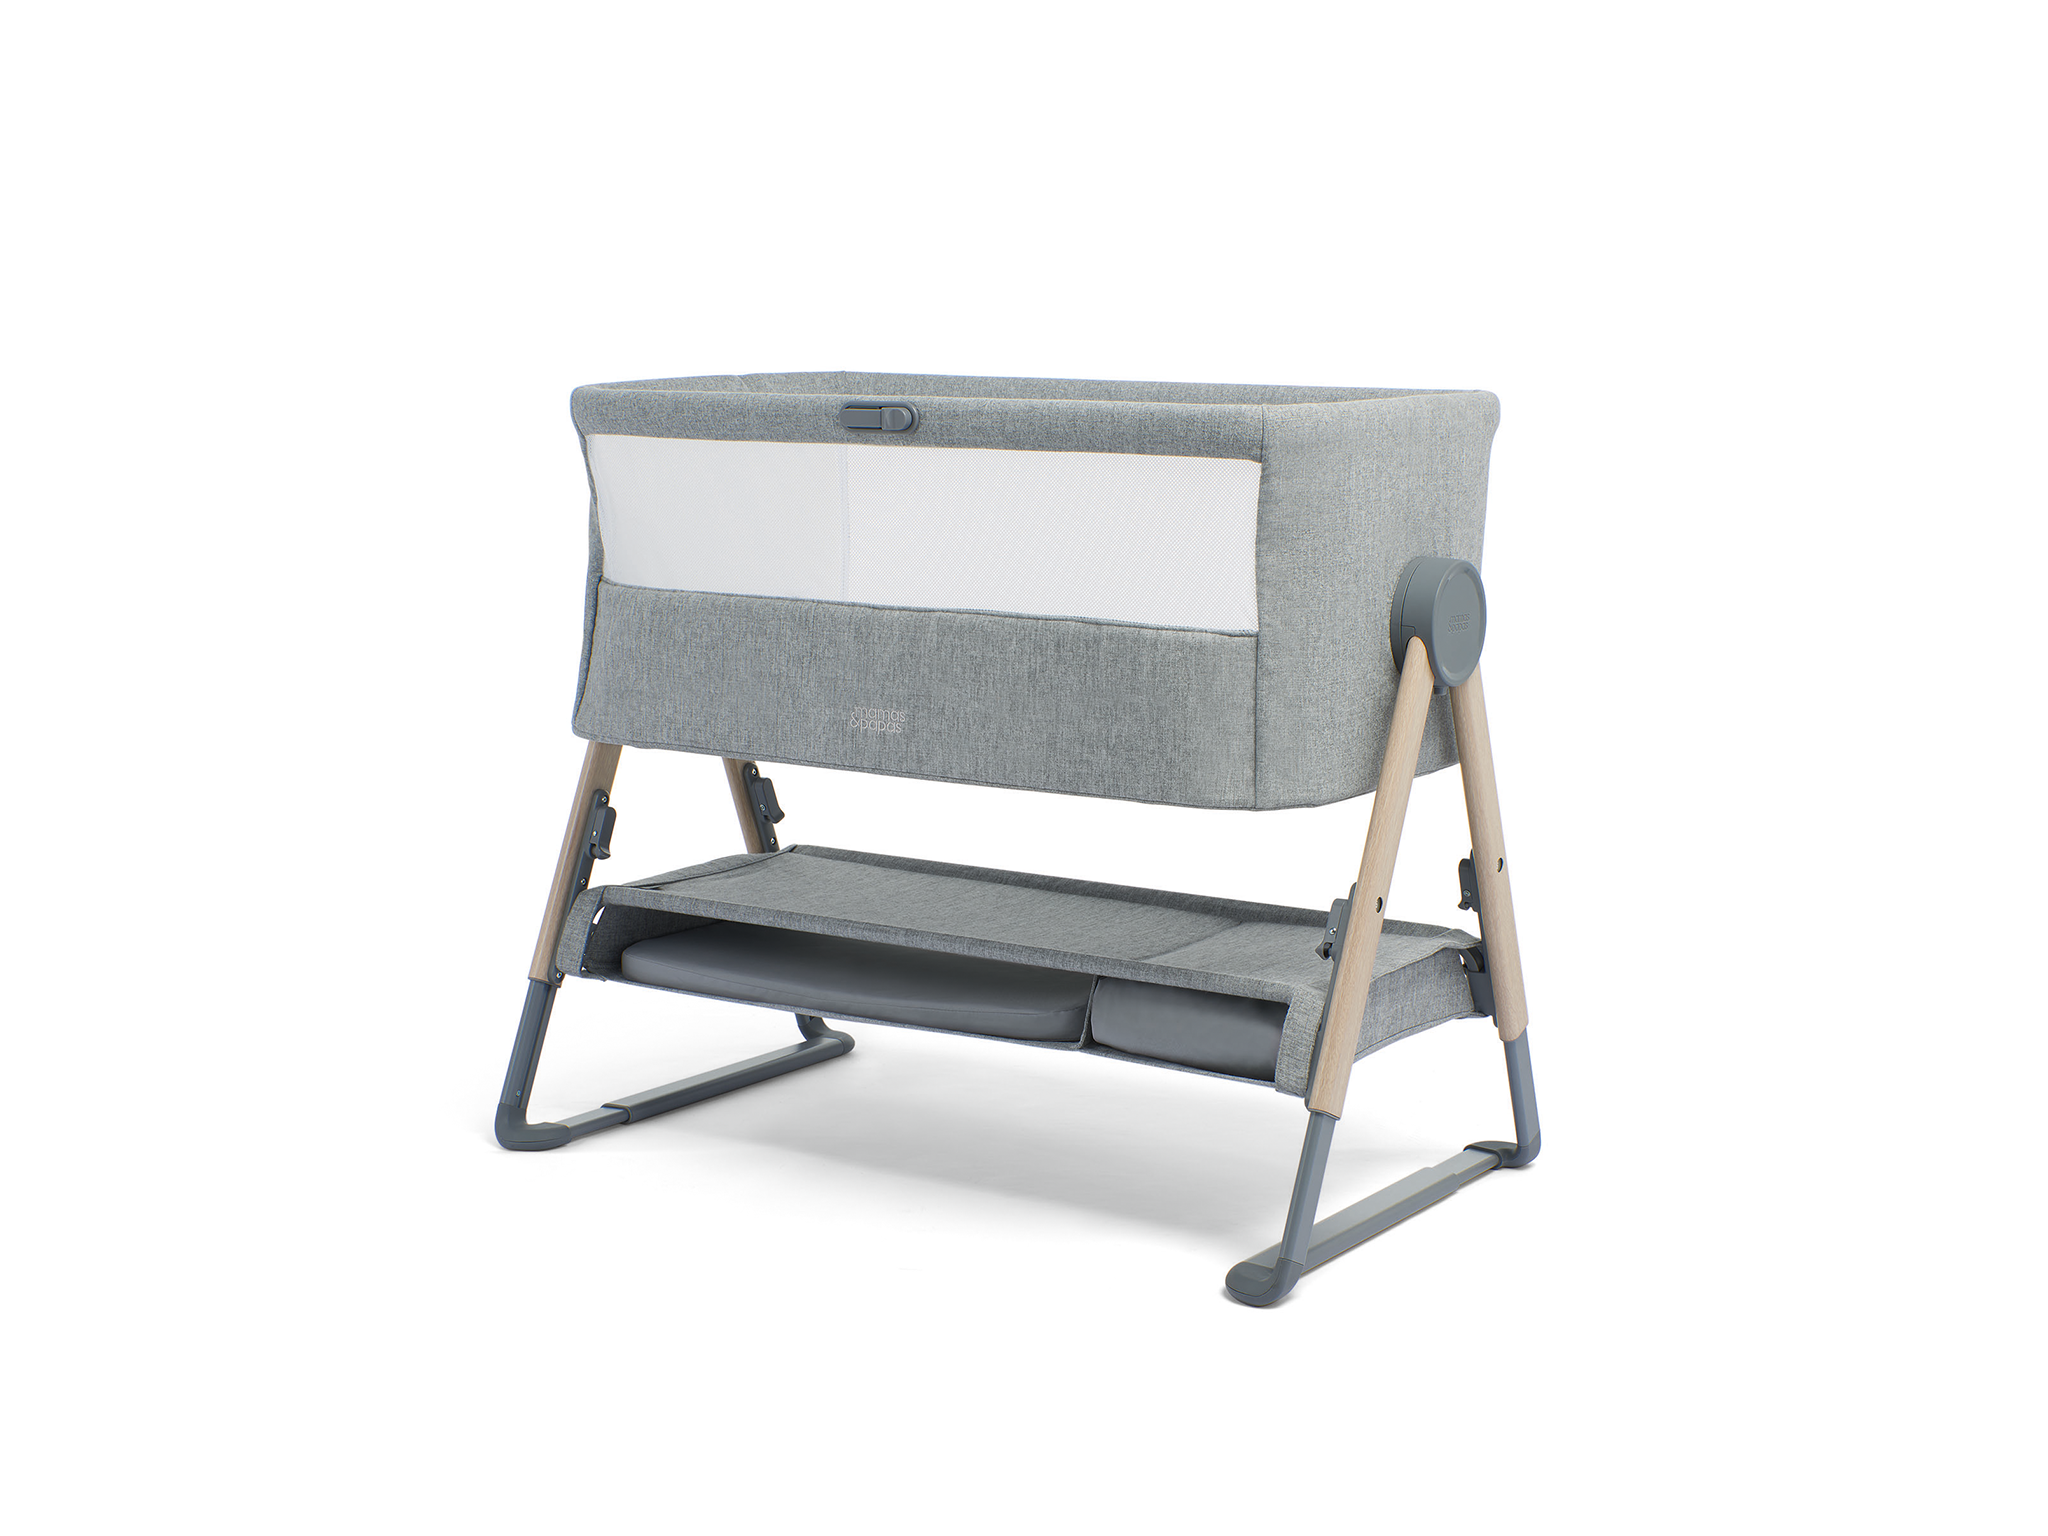 Hauck Face To Me Bedside Baby Crib Travel Bassinet Cradle Cot Moses Basket Grey 